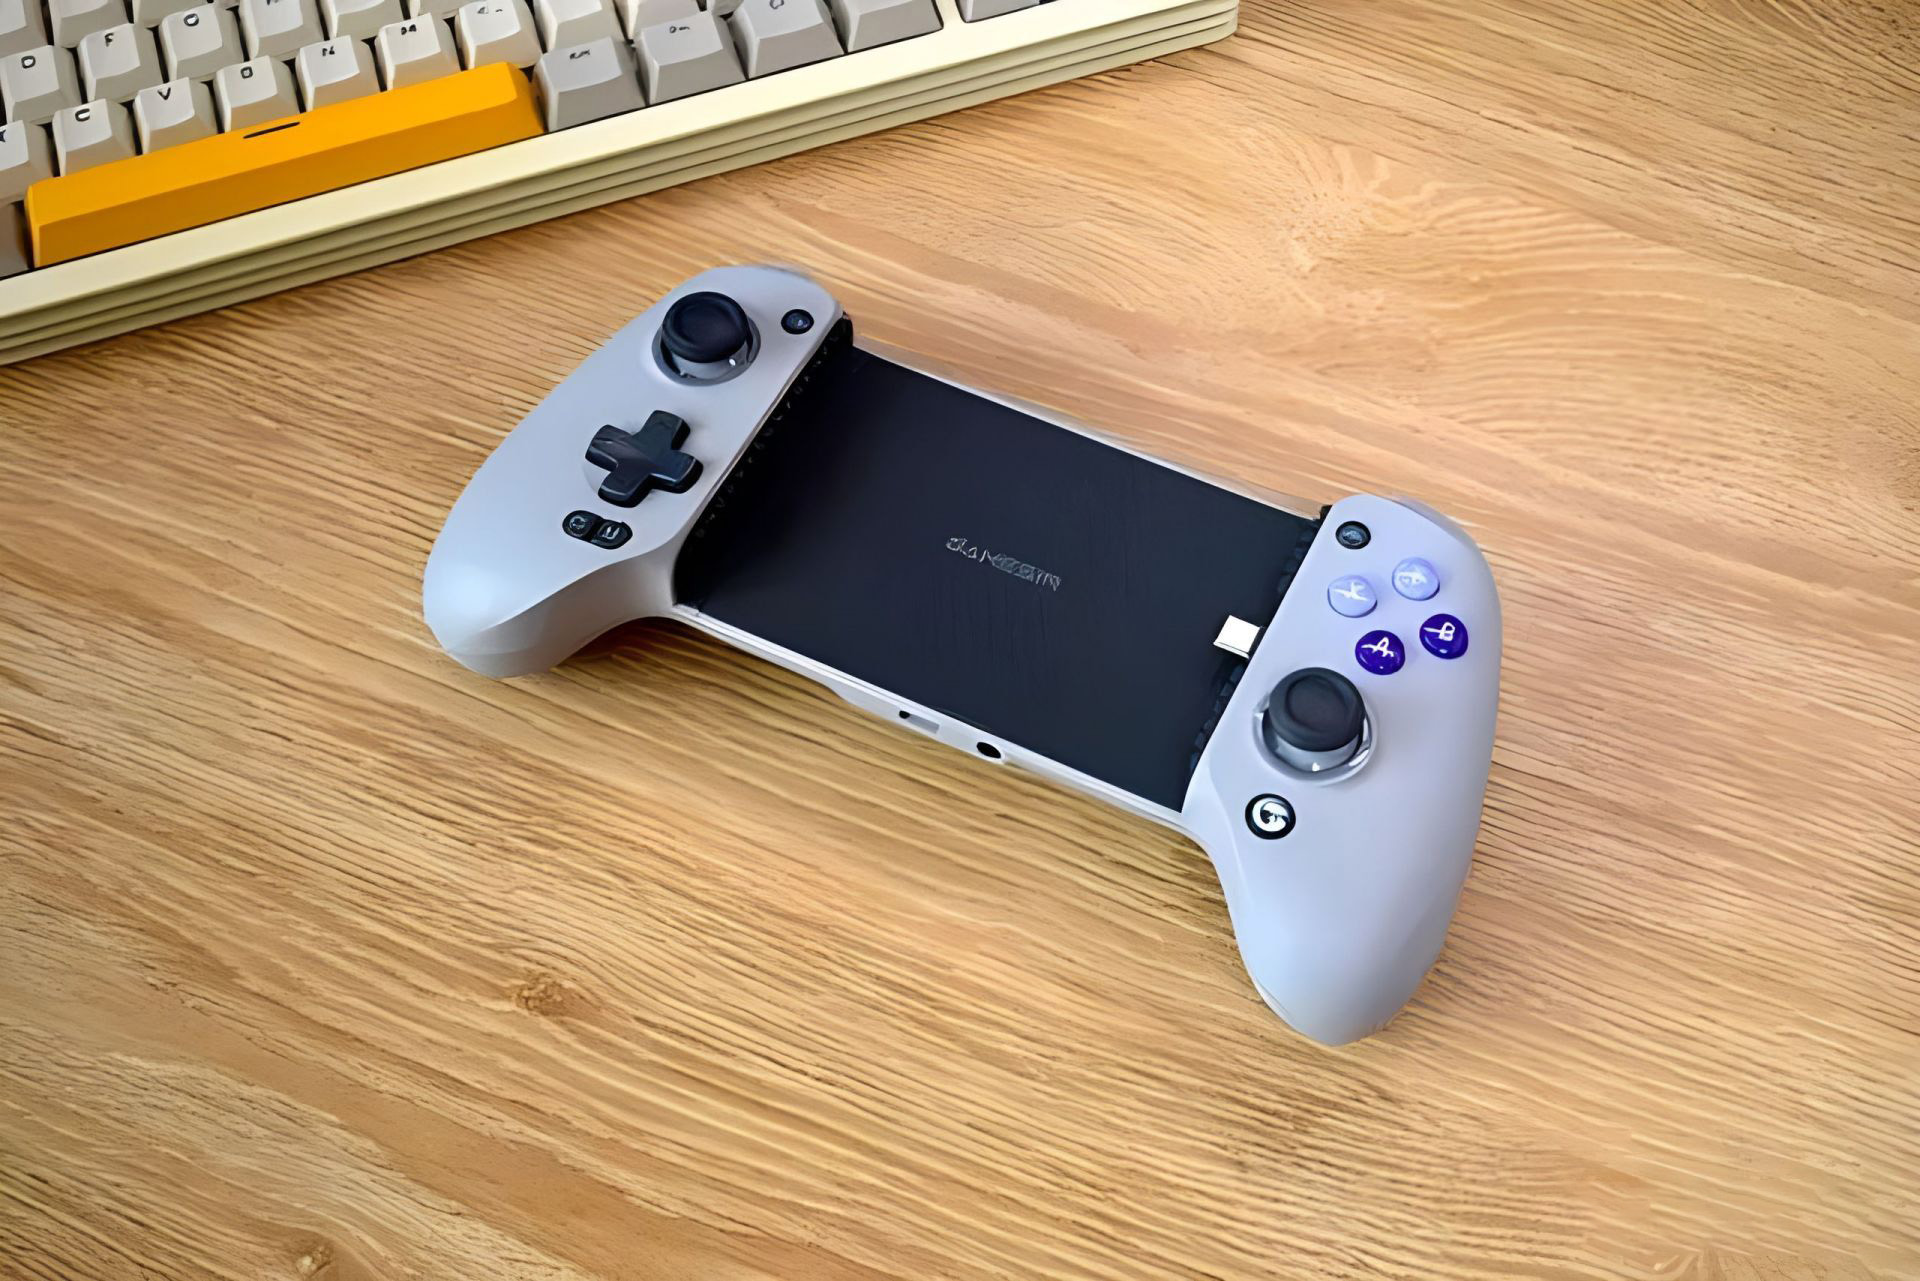 GameSir G8 Galileo Gamepad Review : New mode of mobile gameplay, enjoy the  host experience